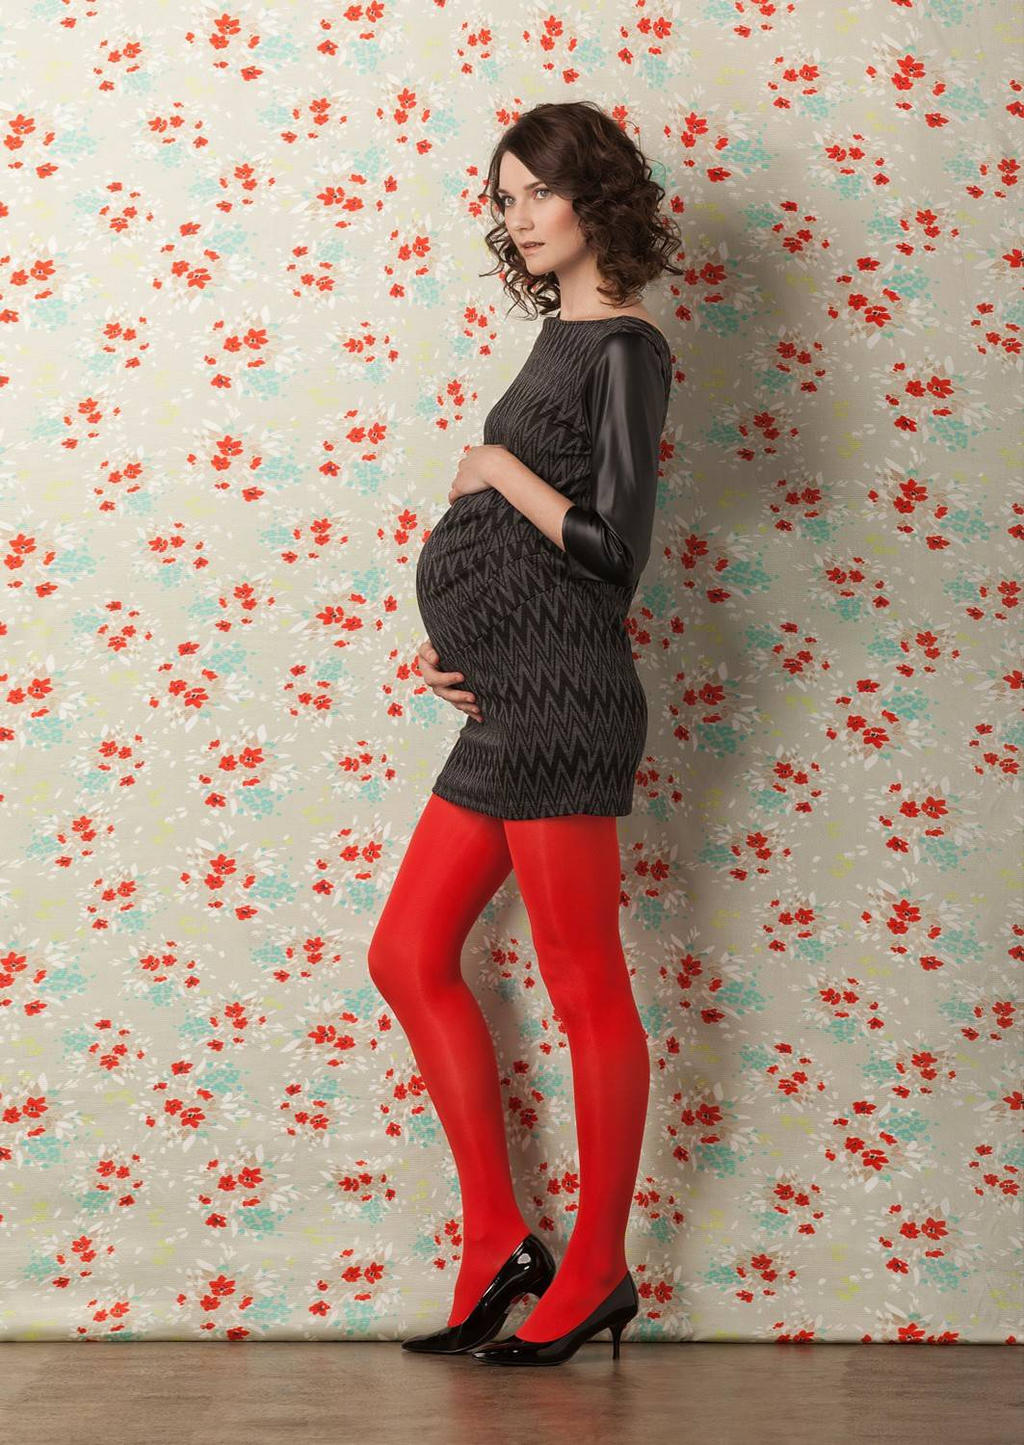 Preggo In Red Tights By Tbiss2000 On Deviantart